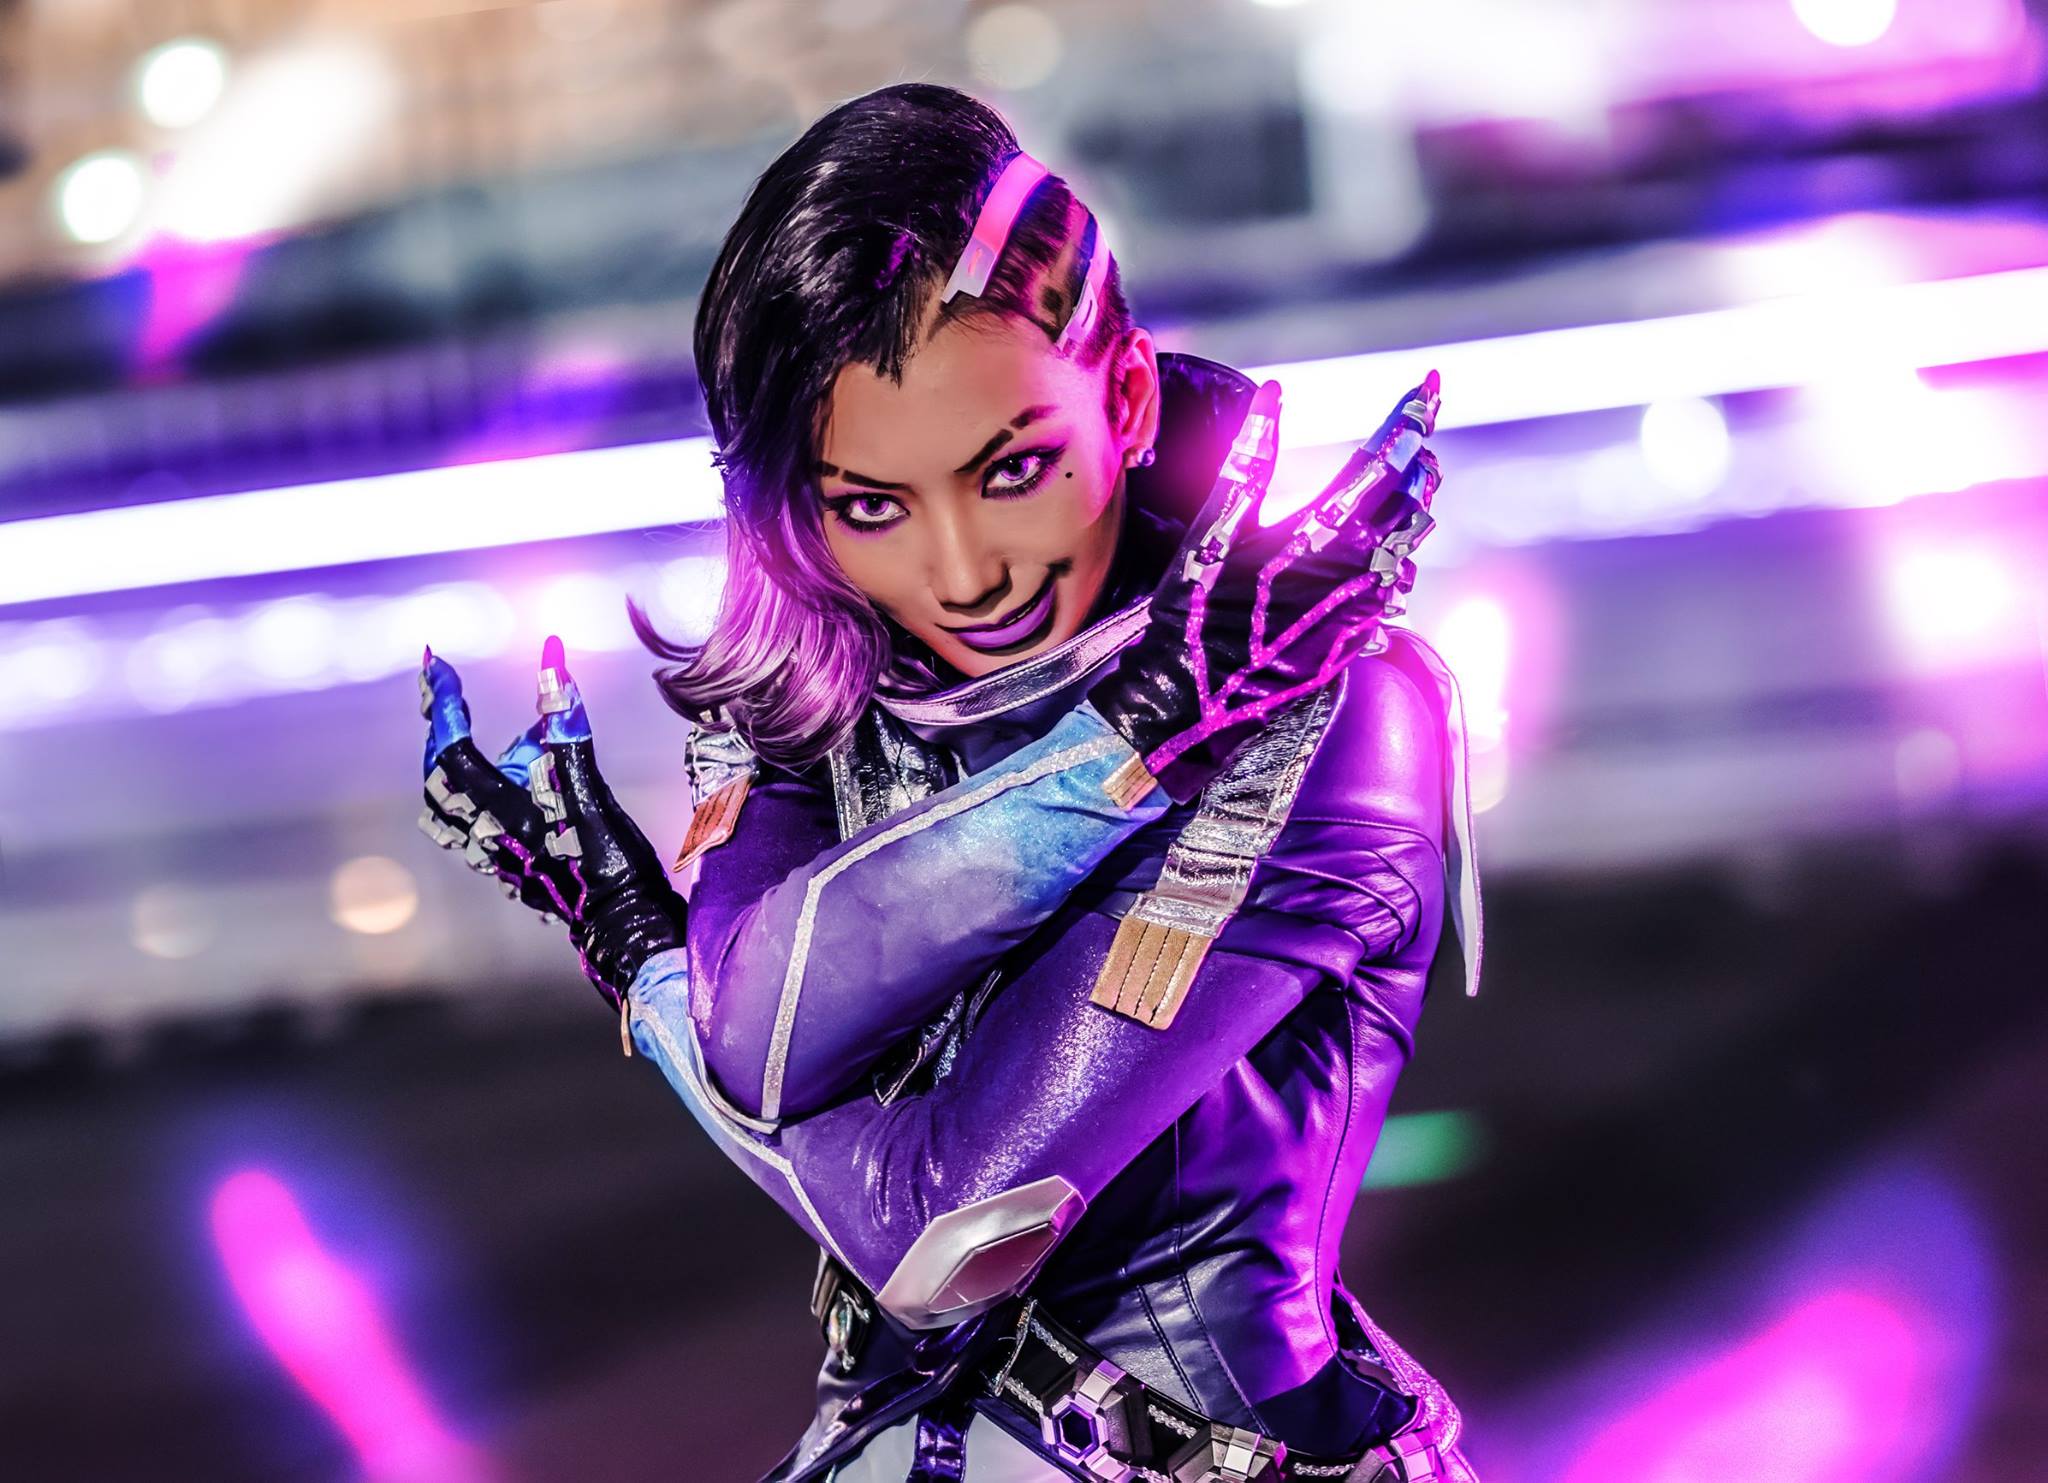 Overwatch: Sombra Cosplay by Pion Kim | AIPT